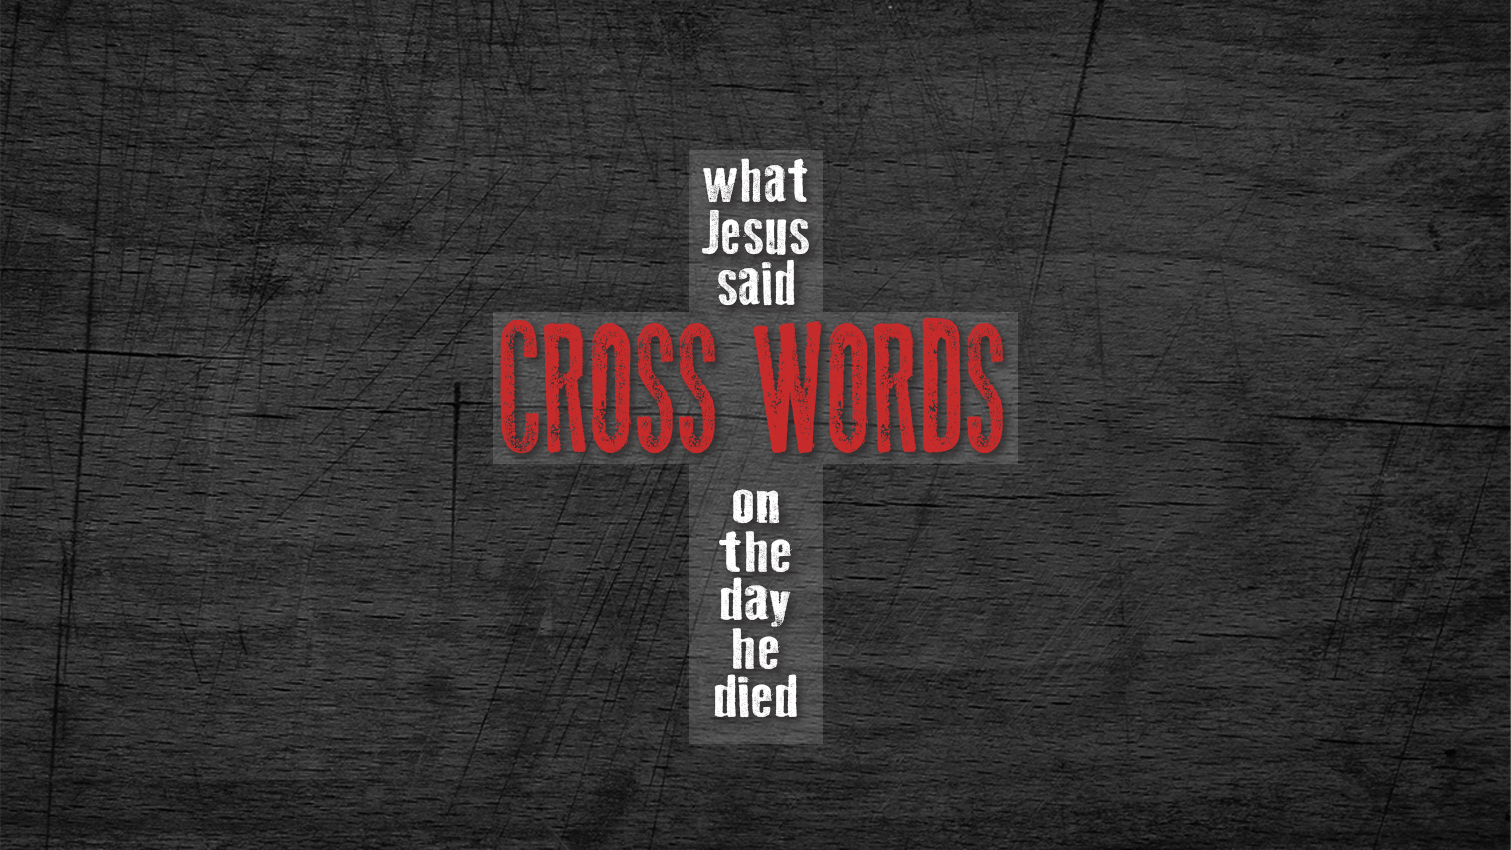 Cross Words: What Jesus Said on the Day He Died